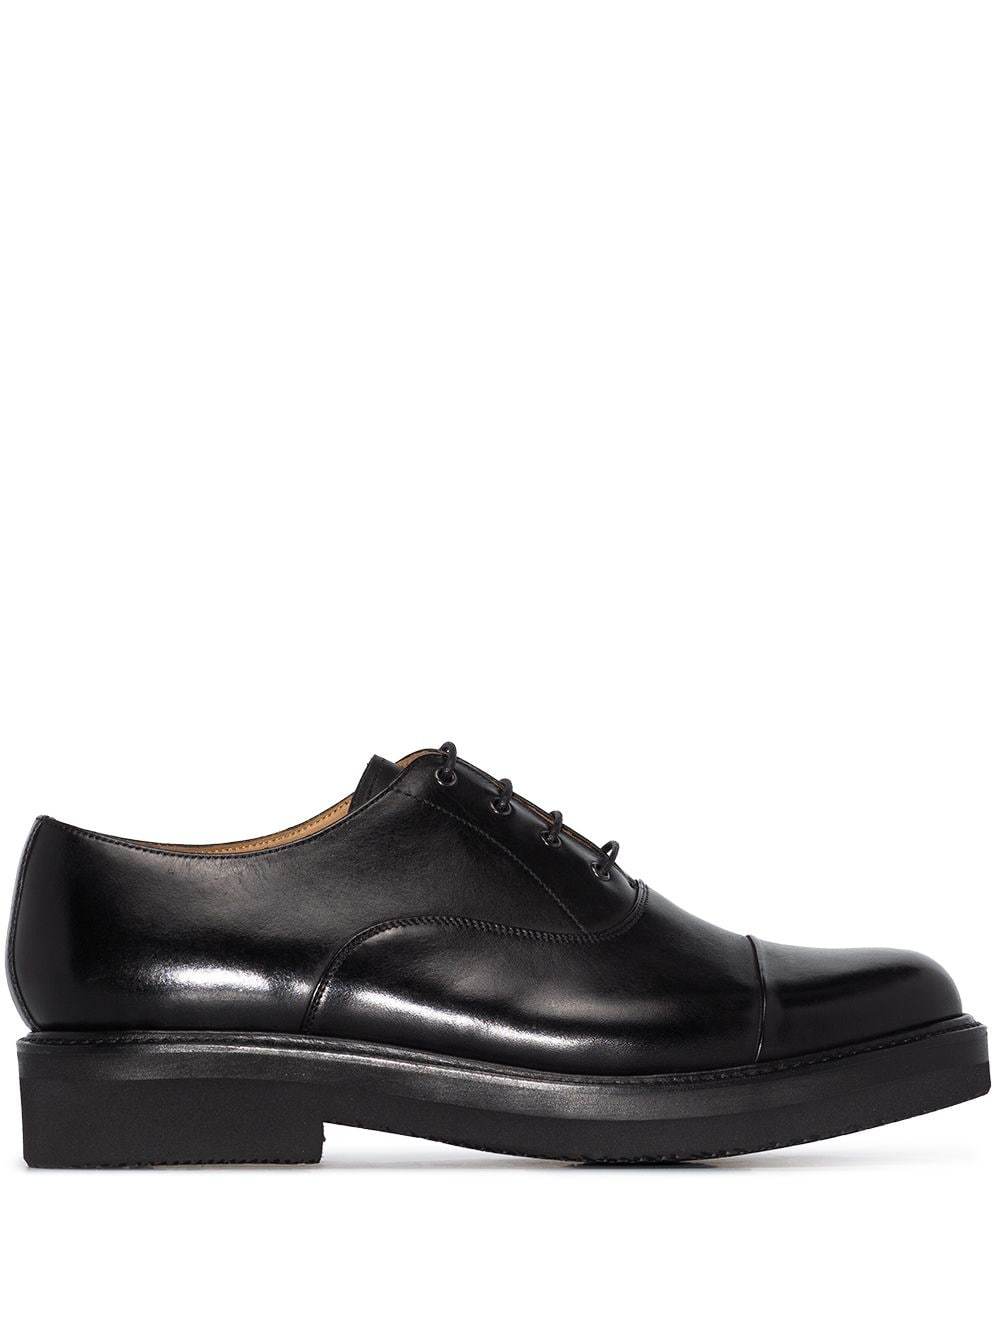 Grenson Ben Leather Oxford Shoes, $157 | farfetch.com | Lookastic